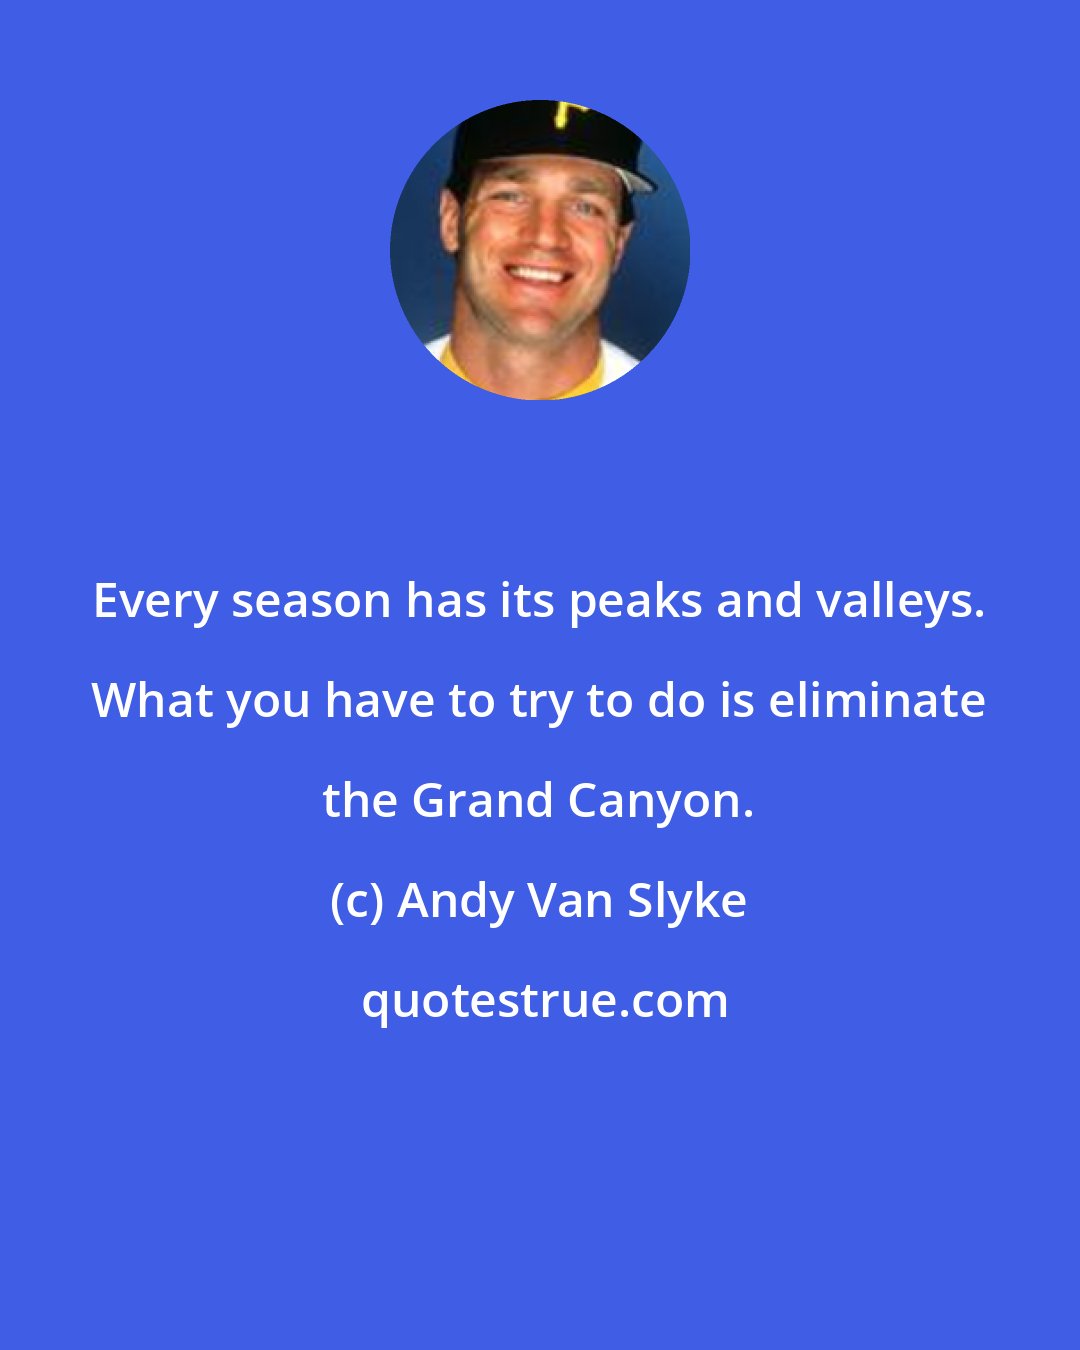 Andy Van Slyke: Every season has its peaks and valleys. What you have to try to do is eliminate the Grand Canyon.